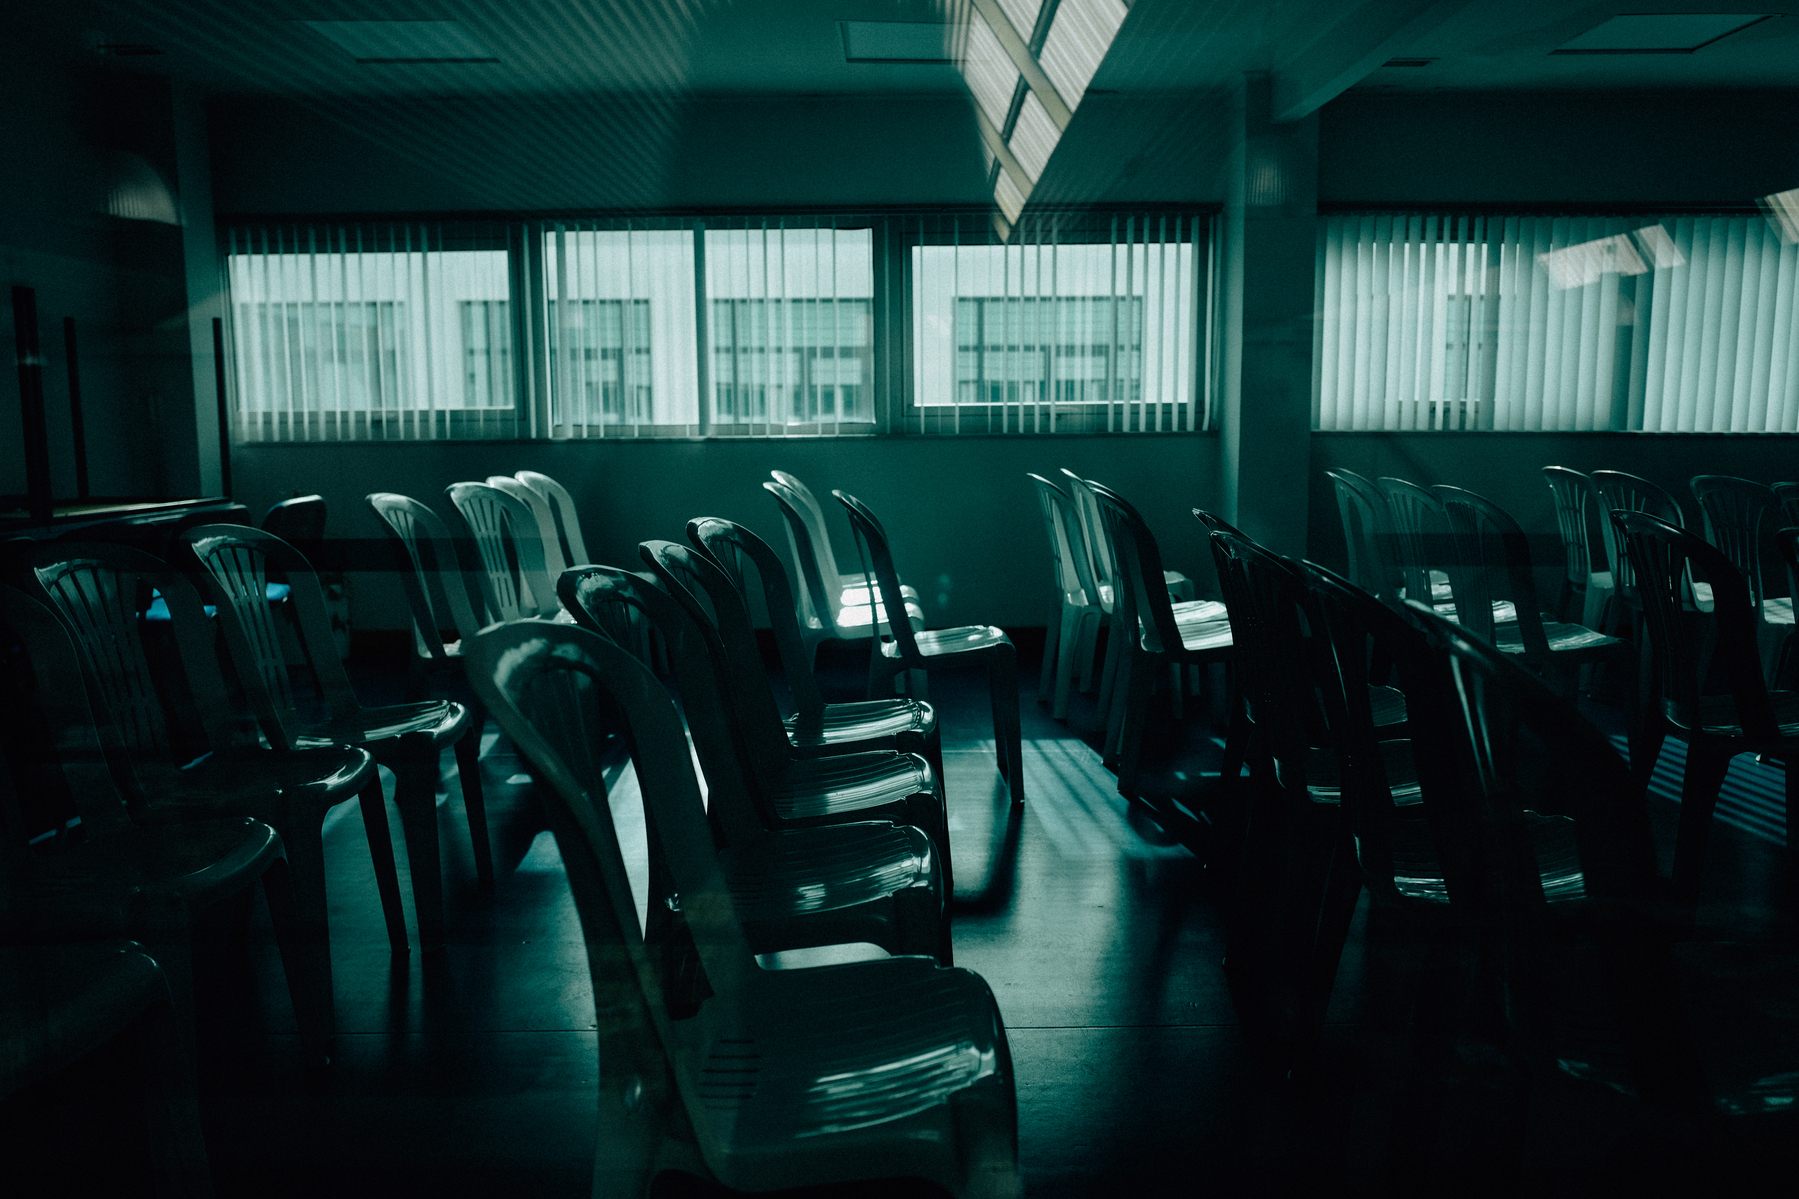 An empty room with rows of plastic chairs and tables, with sunlight casting shadows through blinds on windows and a skylight.